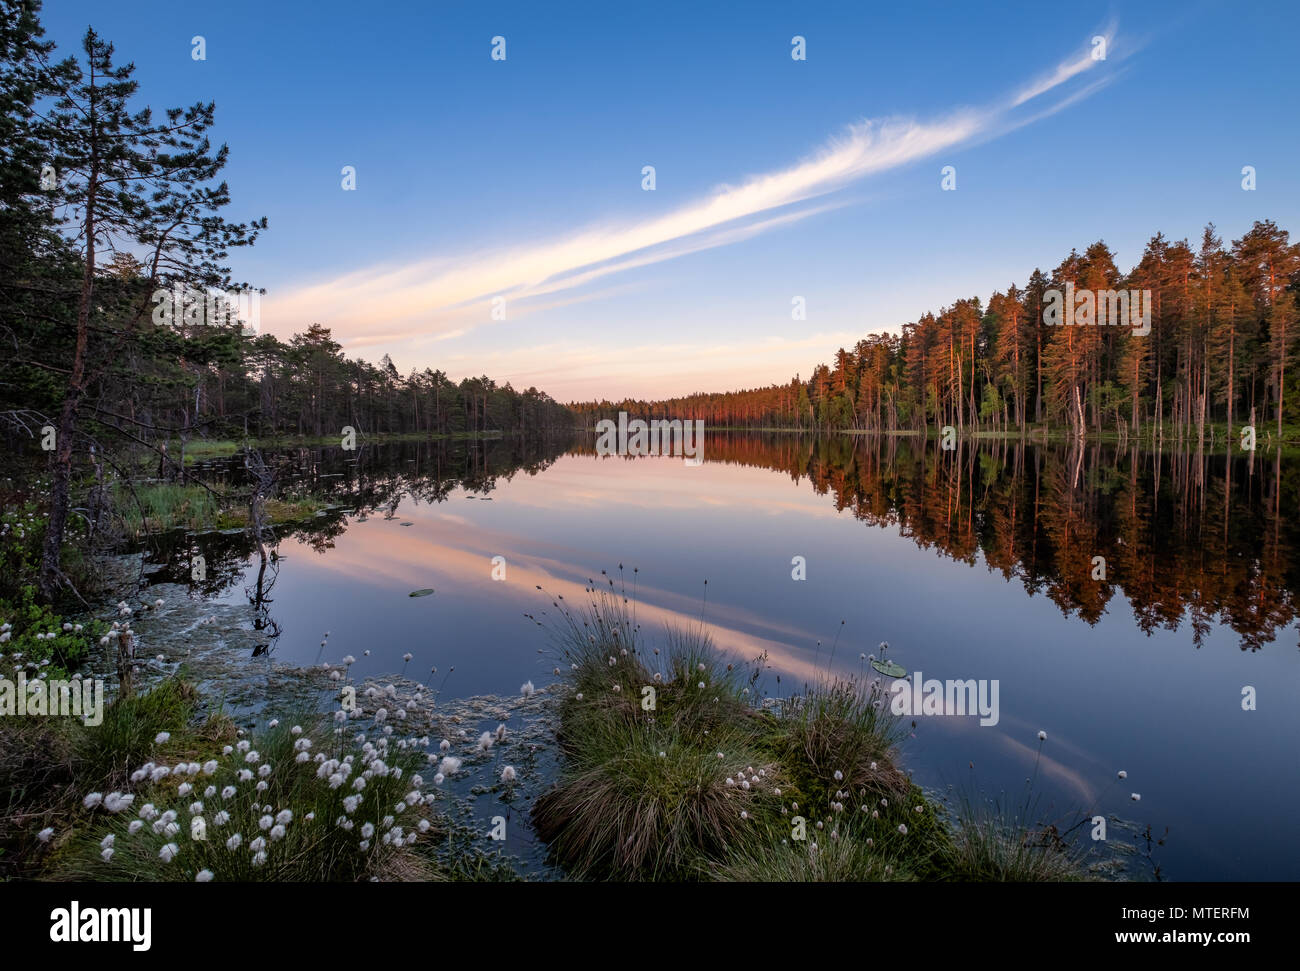 Scenic lake view with flowers and sunset at peaceful evening in Finland Stock Photo